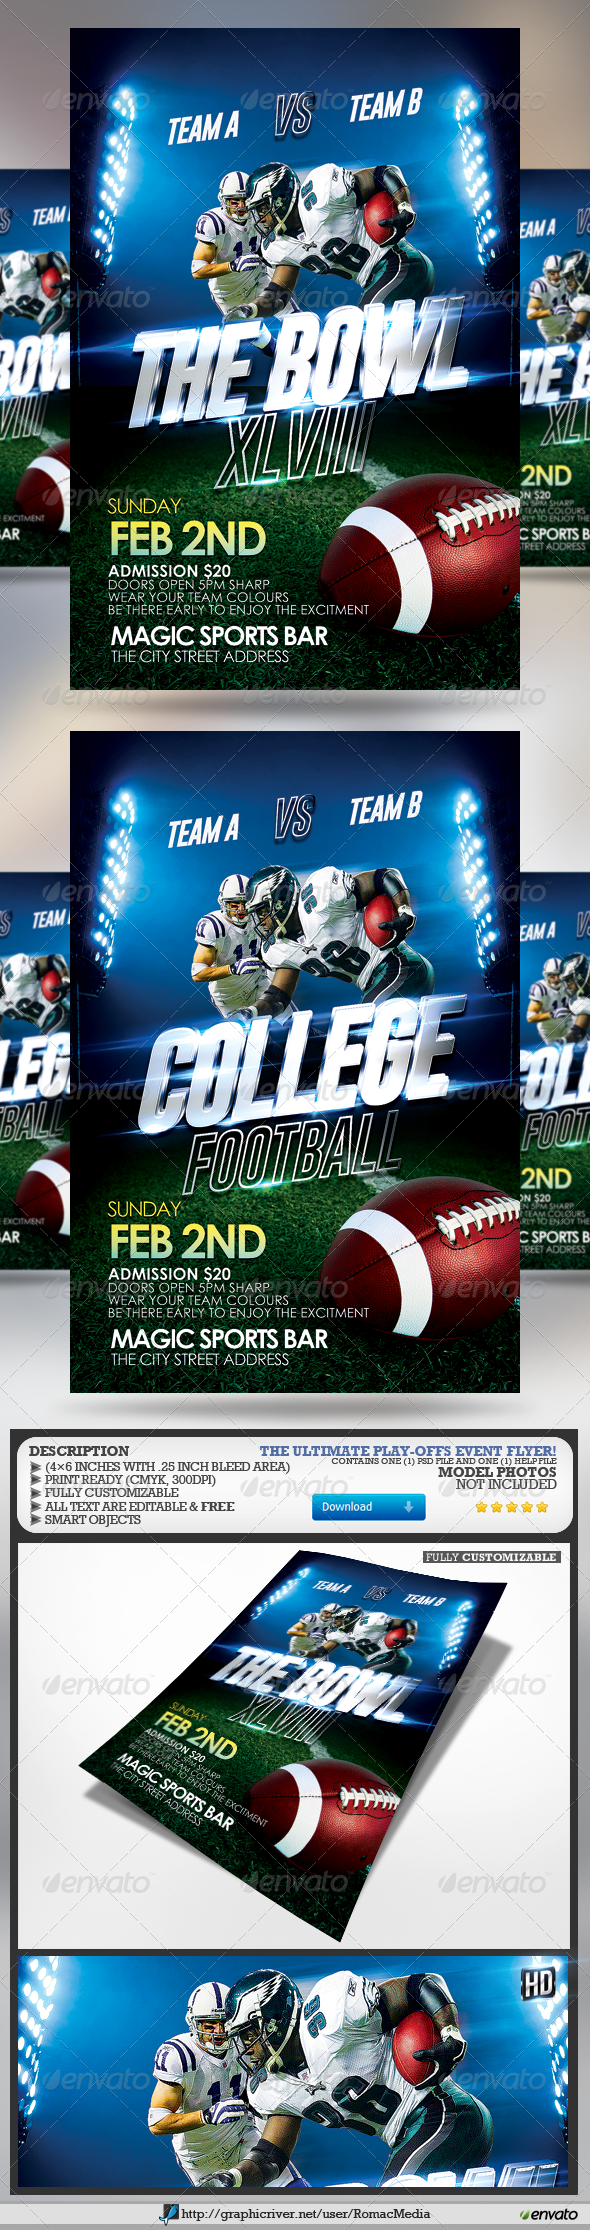 The Bowl and College Football Flyer